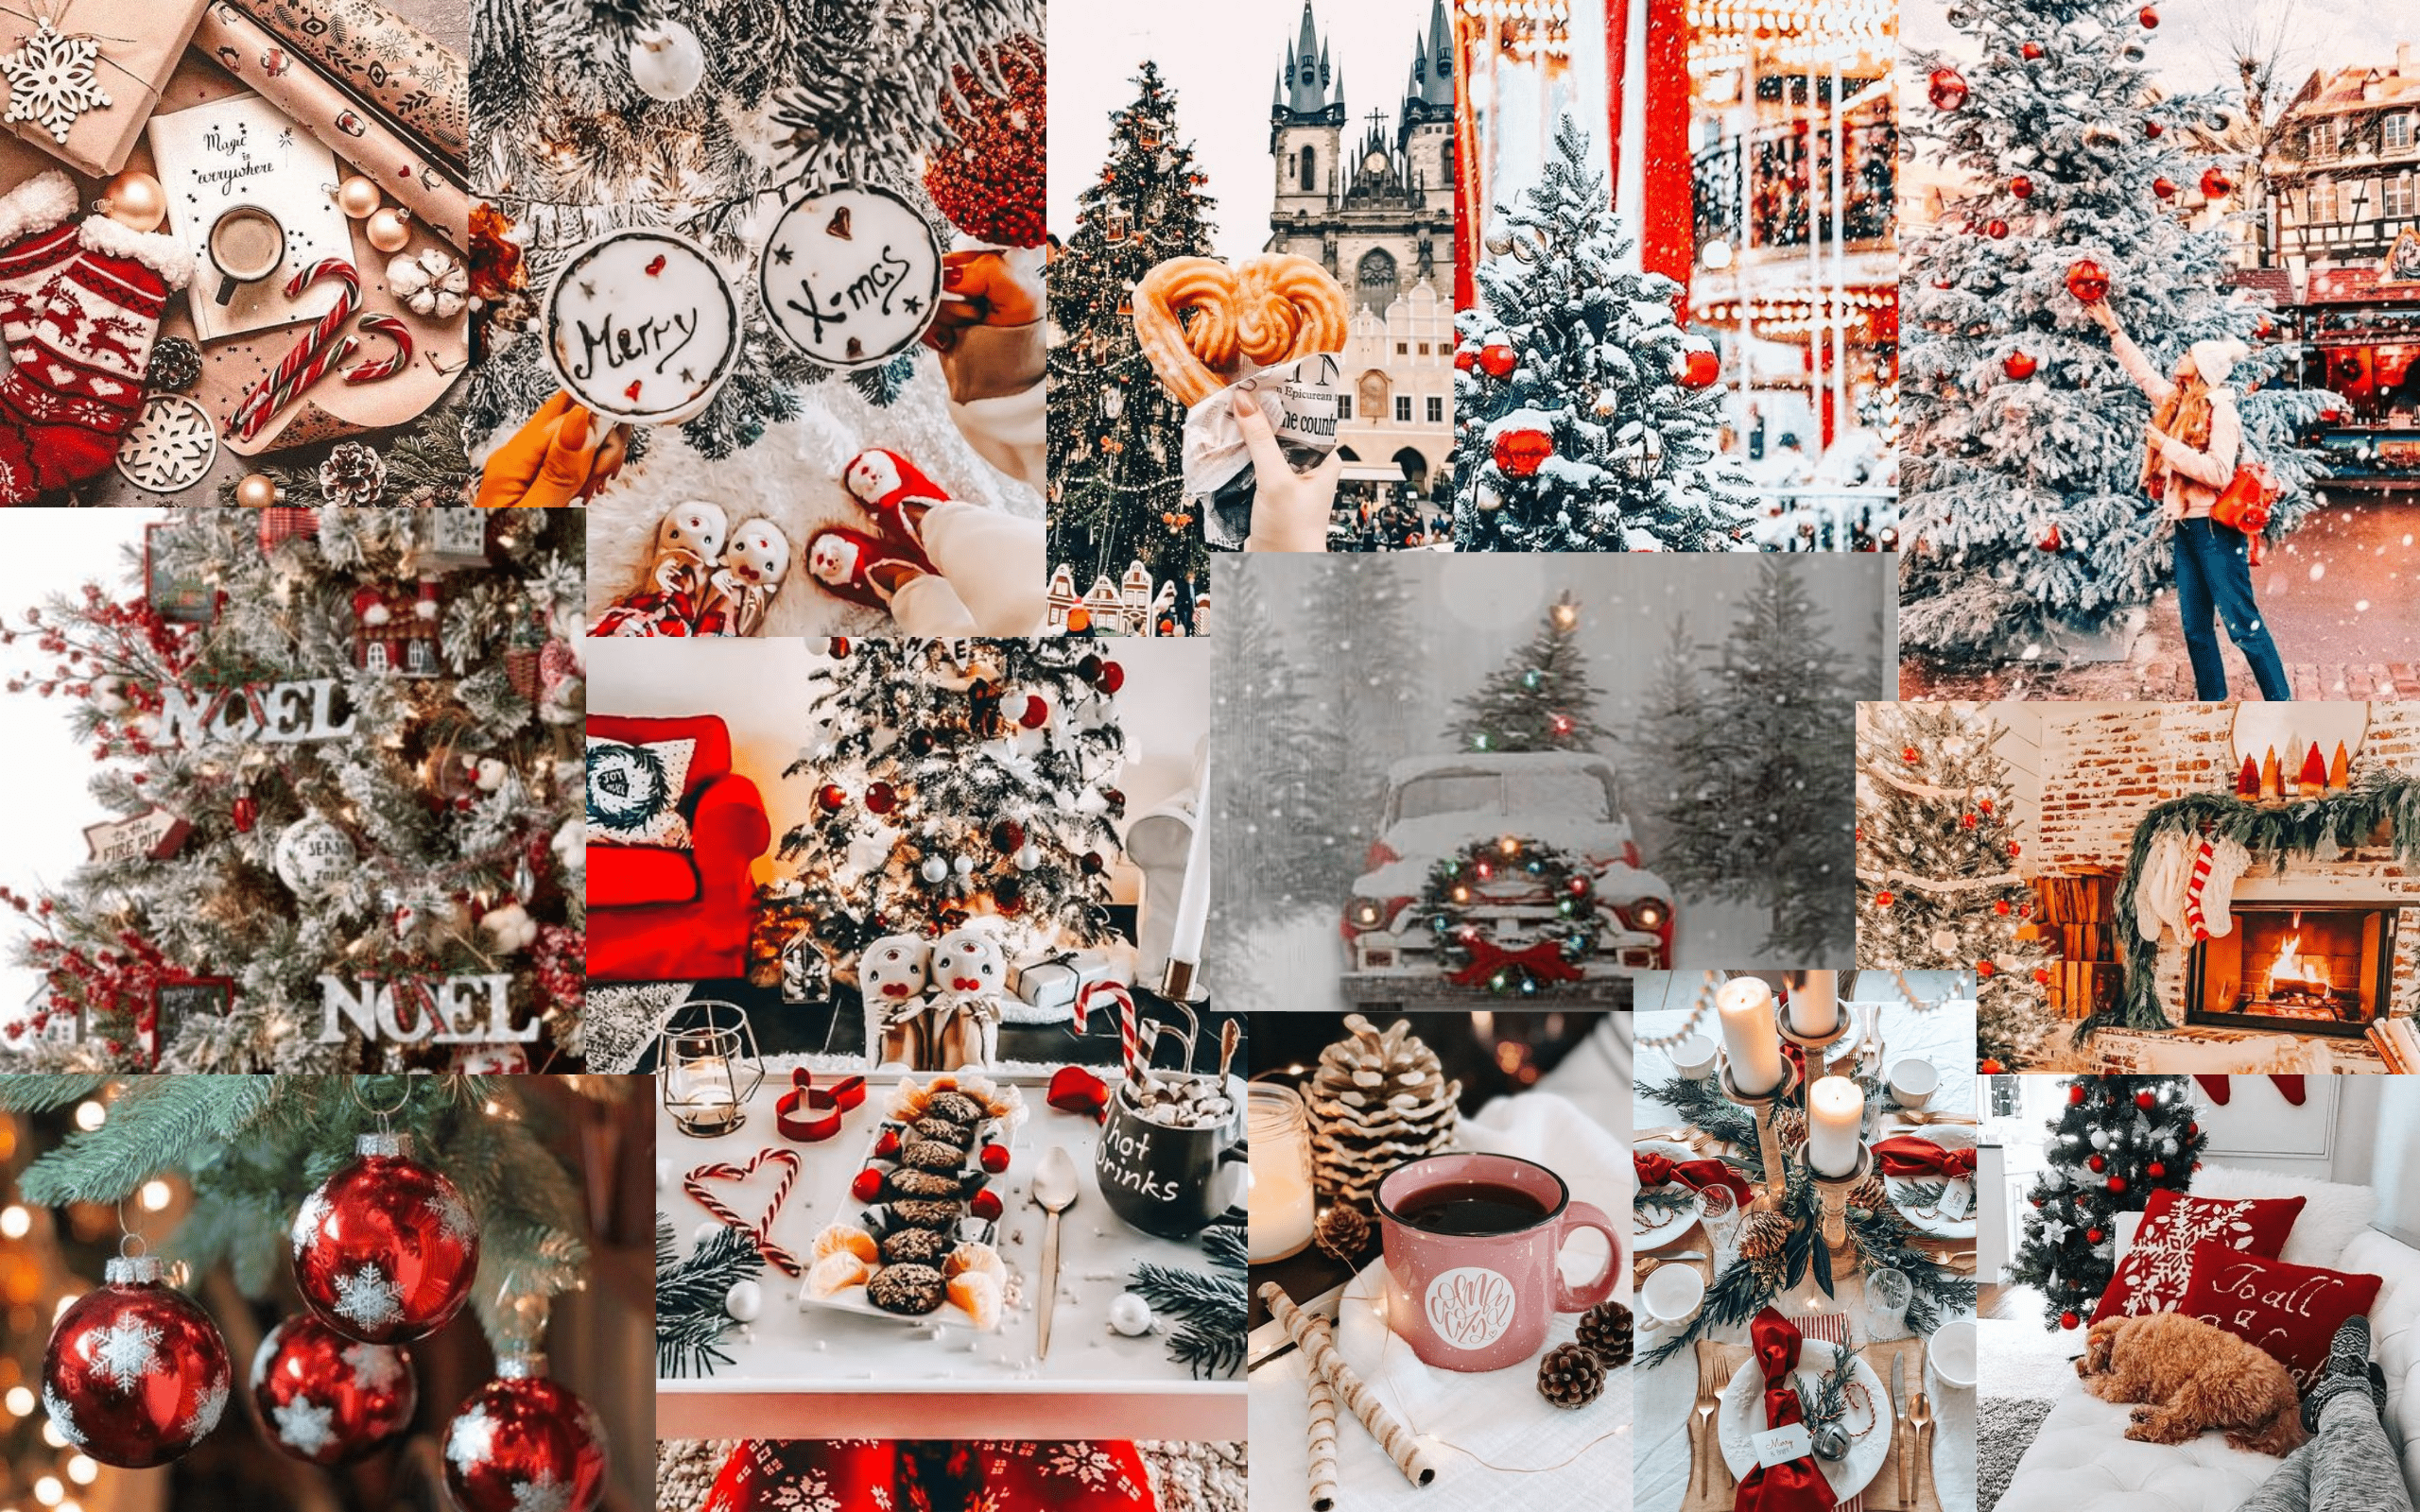 A collage of red and white Christmas images - Christmas, collage, cute Christmas, white Christmas